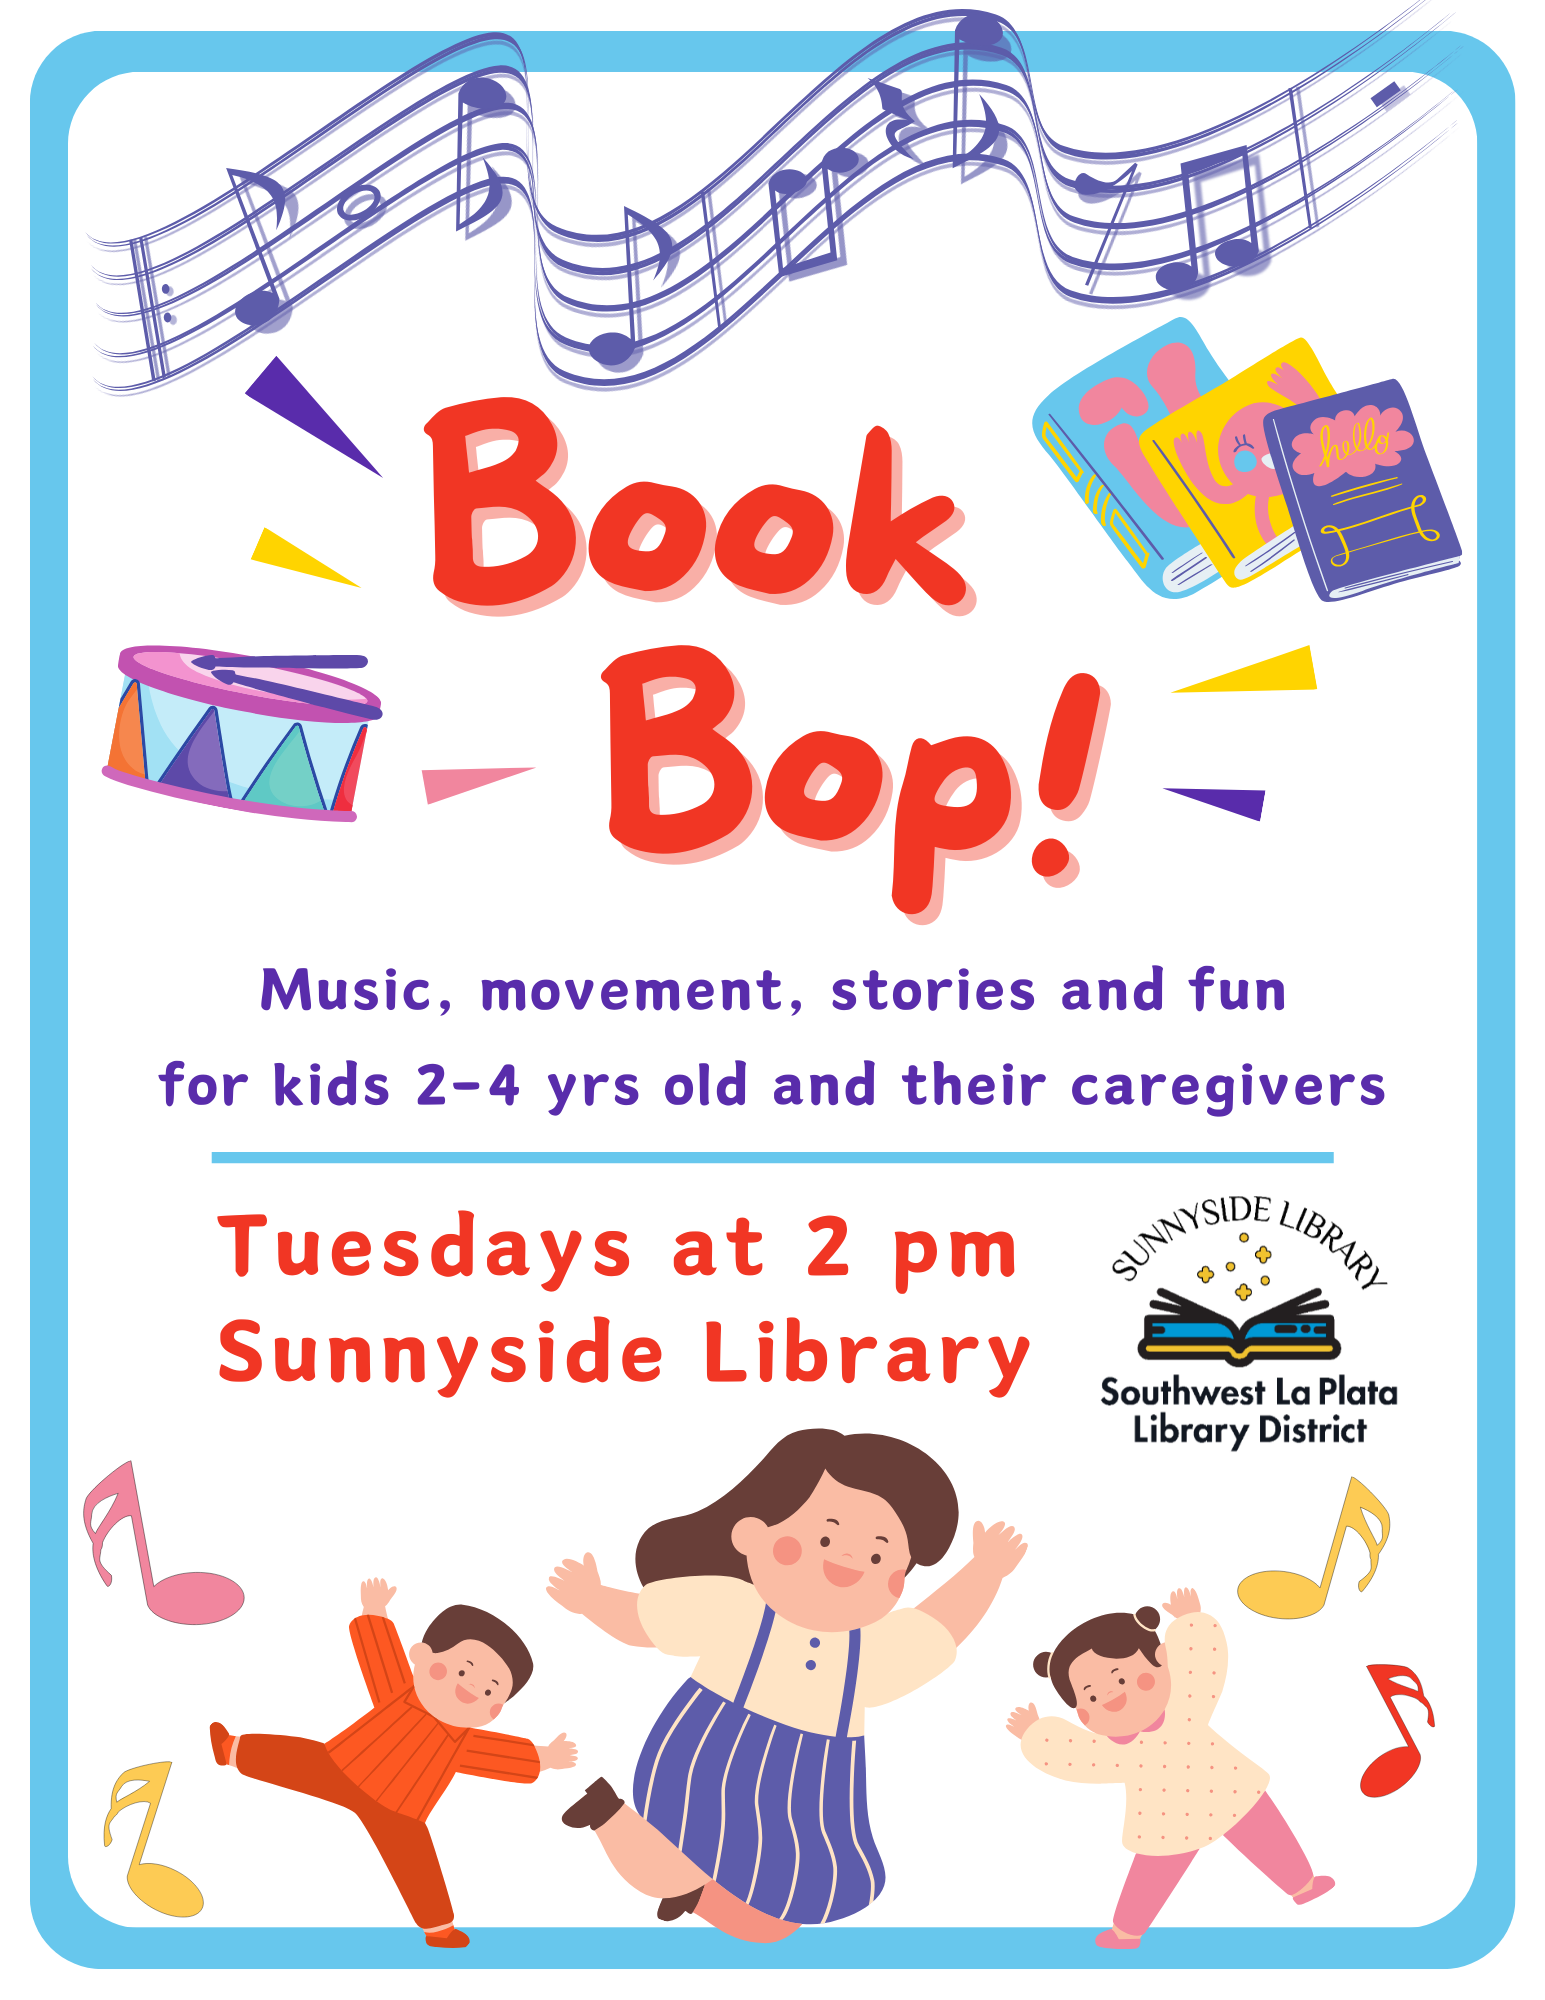 Musical notes on a scale, a drum and pile of books above the words "Book Bop" Music, movement, stories and fun for kids 2-4 yrs old and their caregivers. Tuesday at 2 pm, Sunnyside Library. Below the text are three young children dancing around musical notes. The Sunnyside/Southwest La Plata Library District logo shows an open book with "magic" floating above the pages.